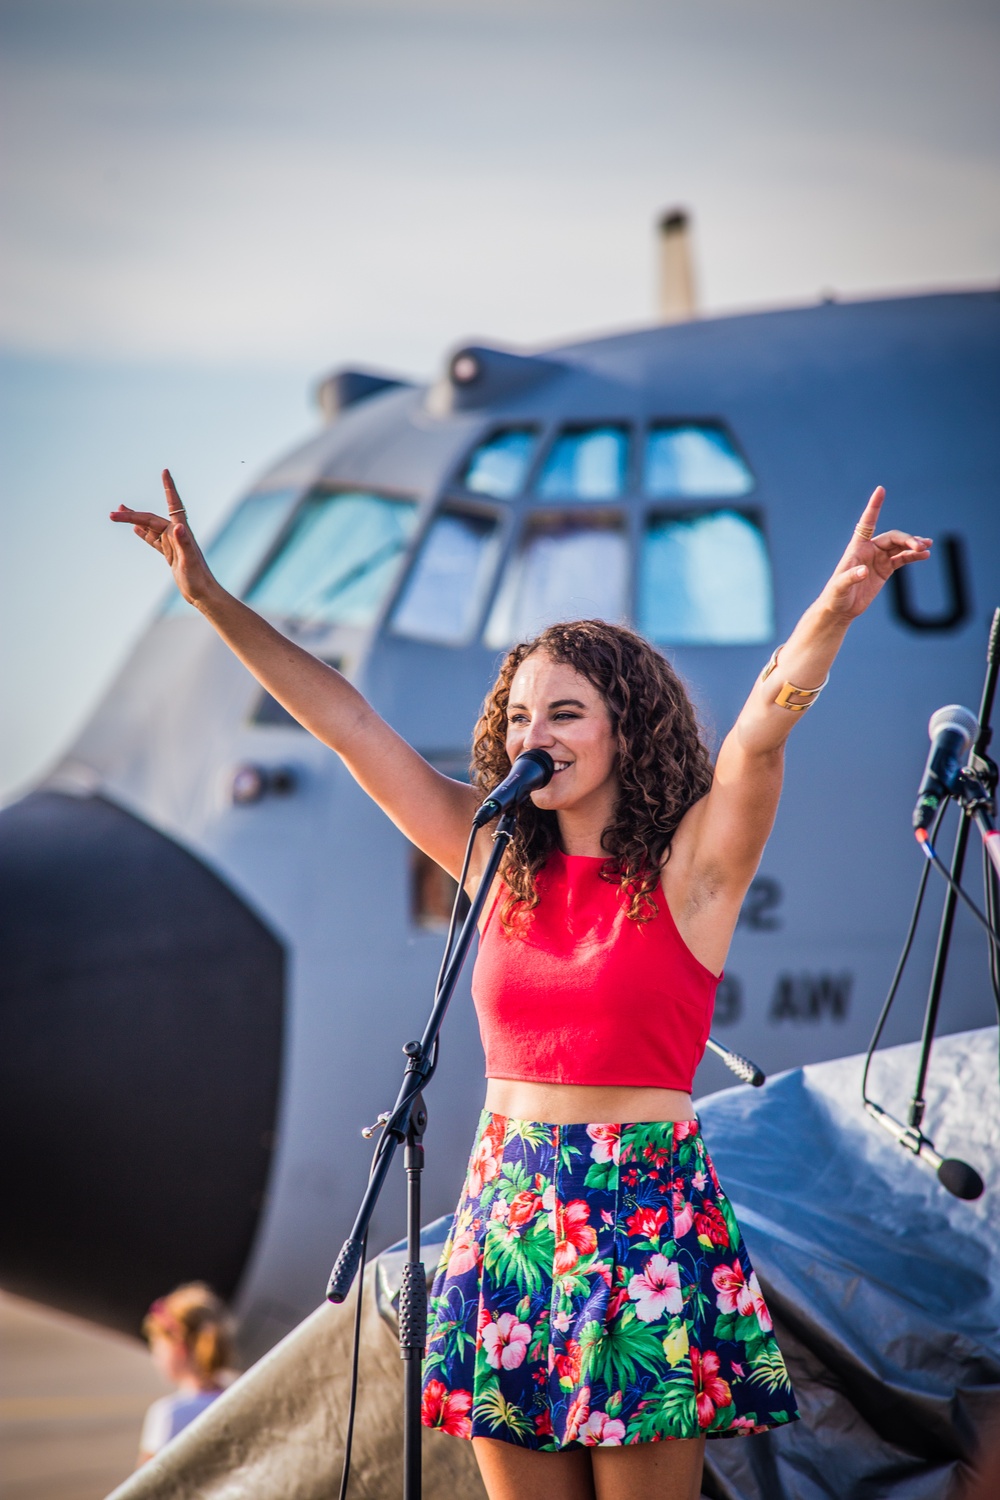 Danika Portz performs for community during air show